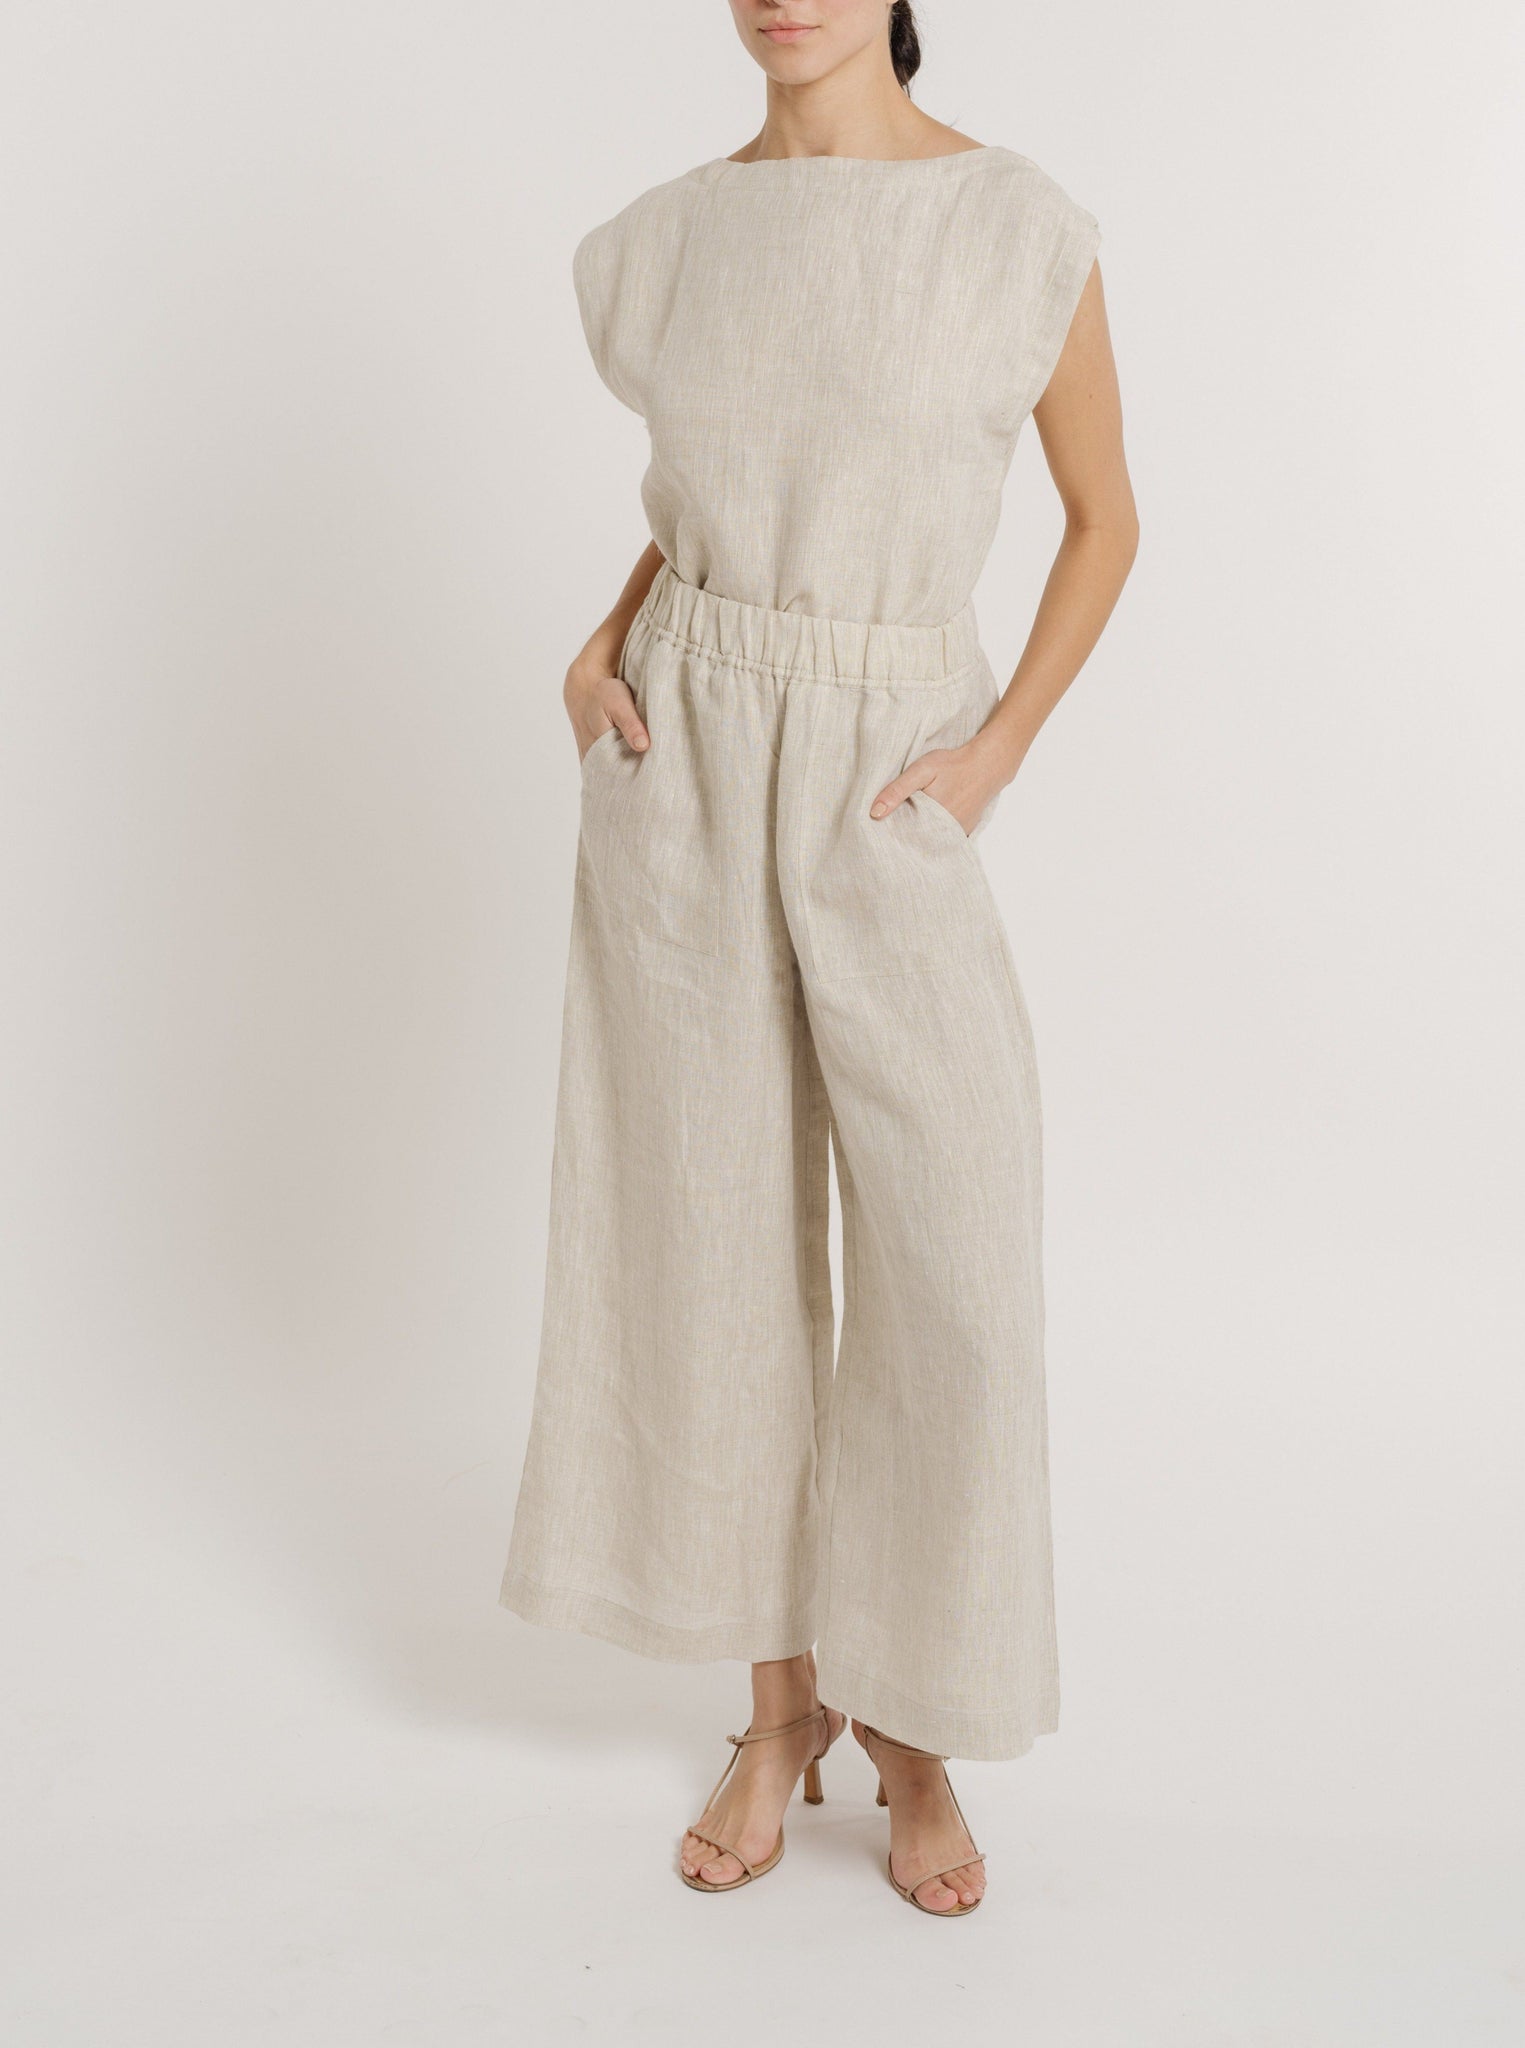 Everyday Pant - Natural Linen in beige.